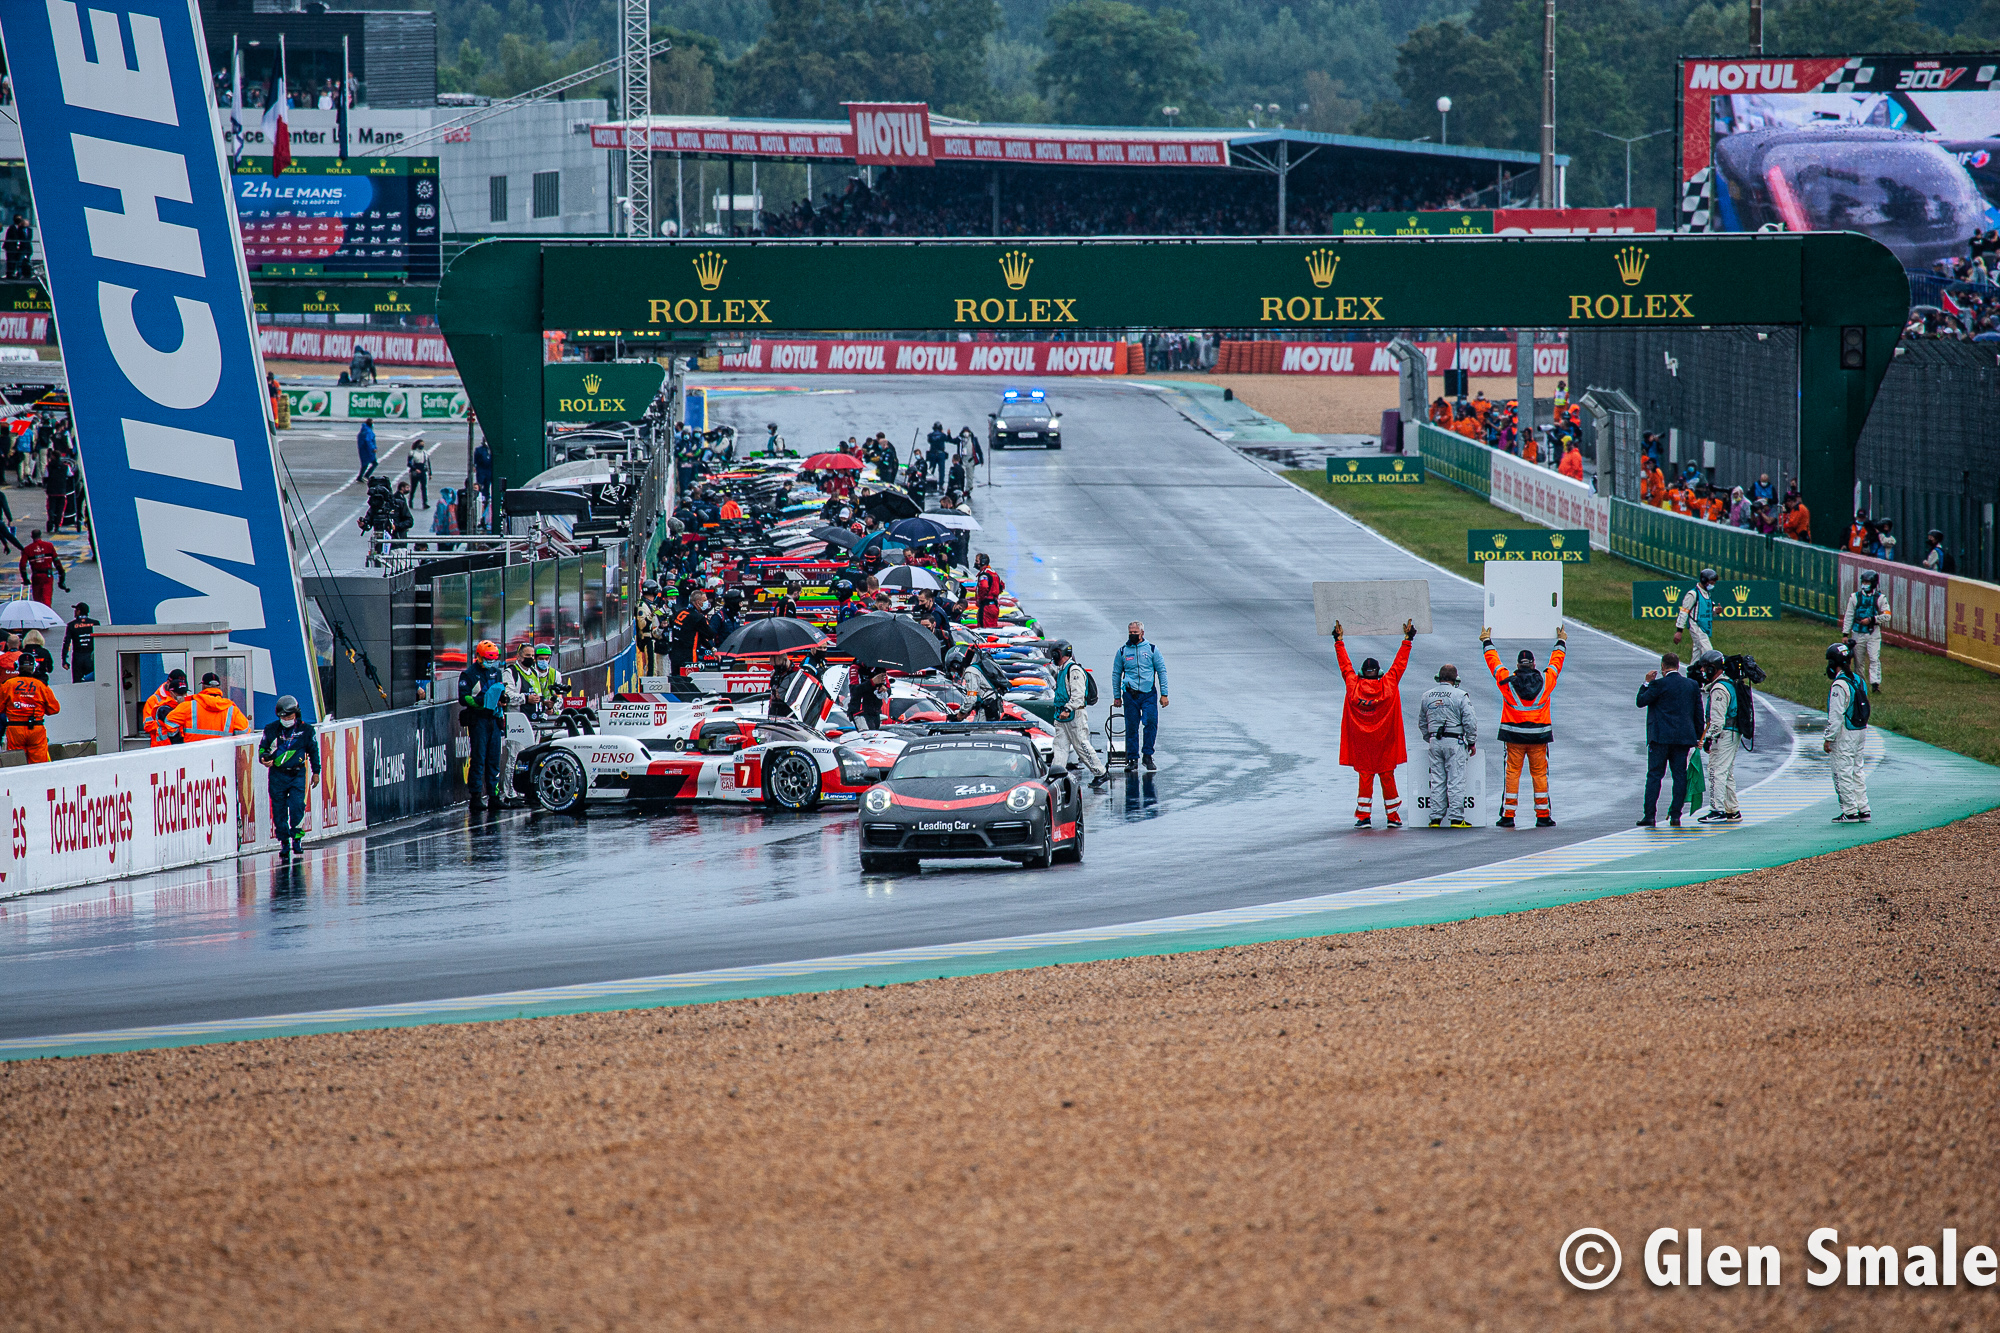 Race cars on the track at the start of 24 Hours of LeMans